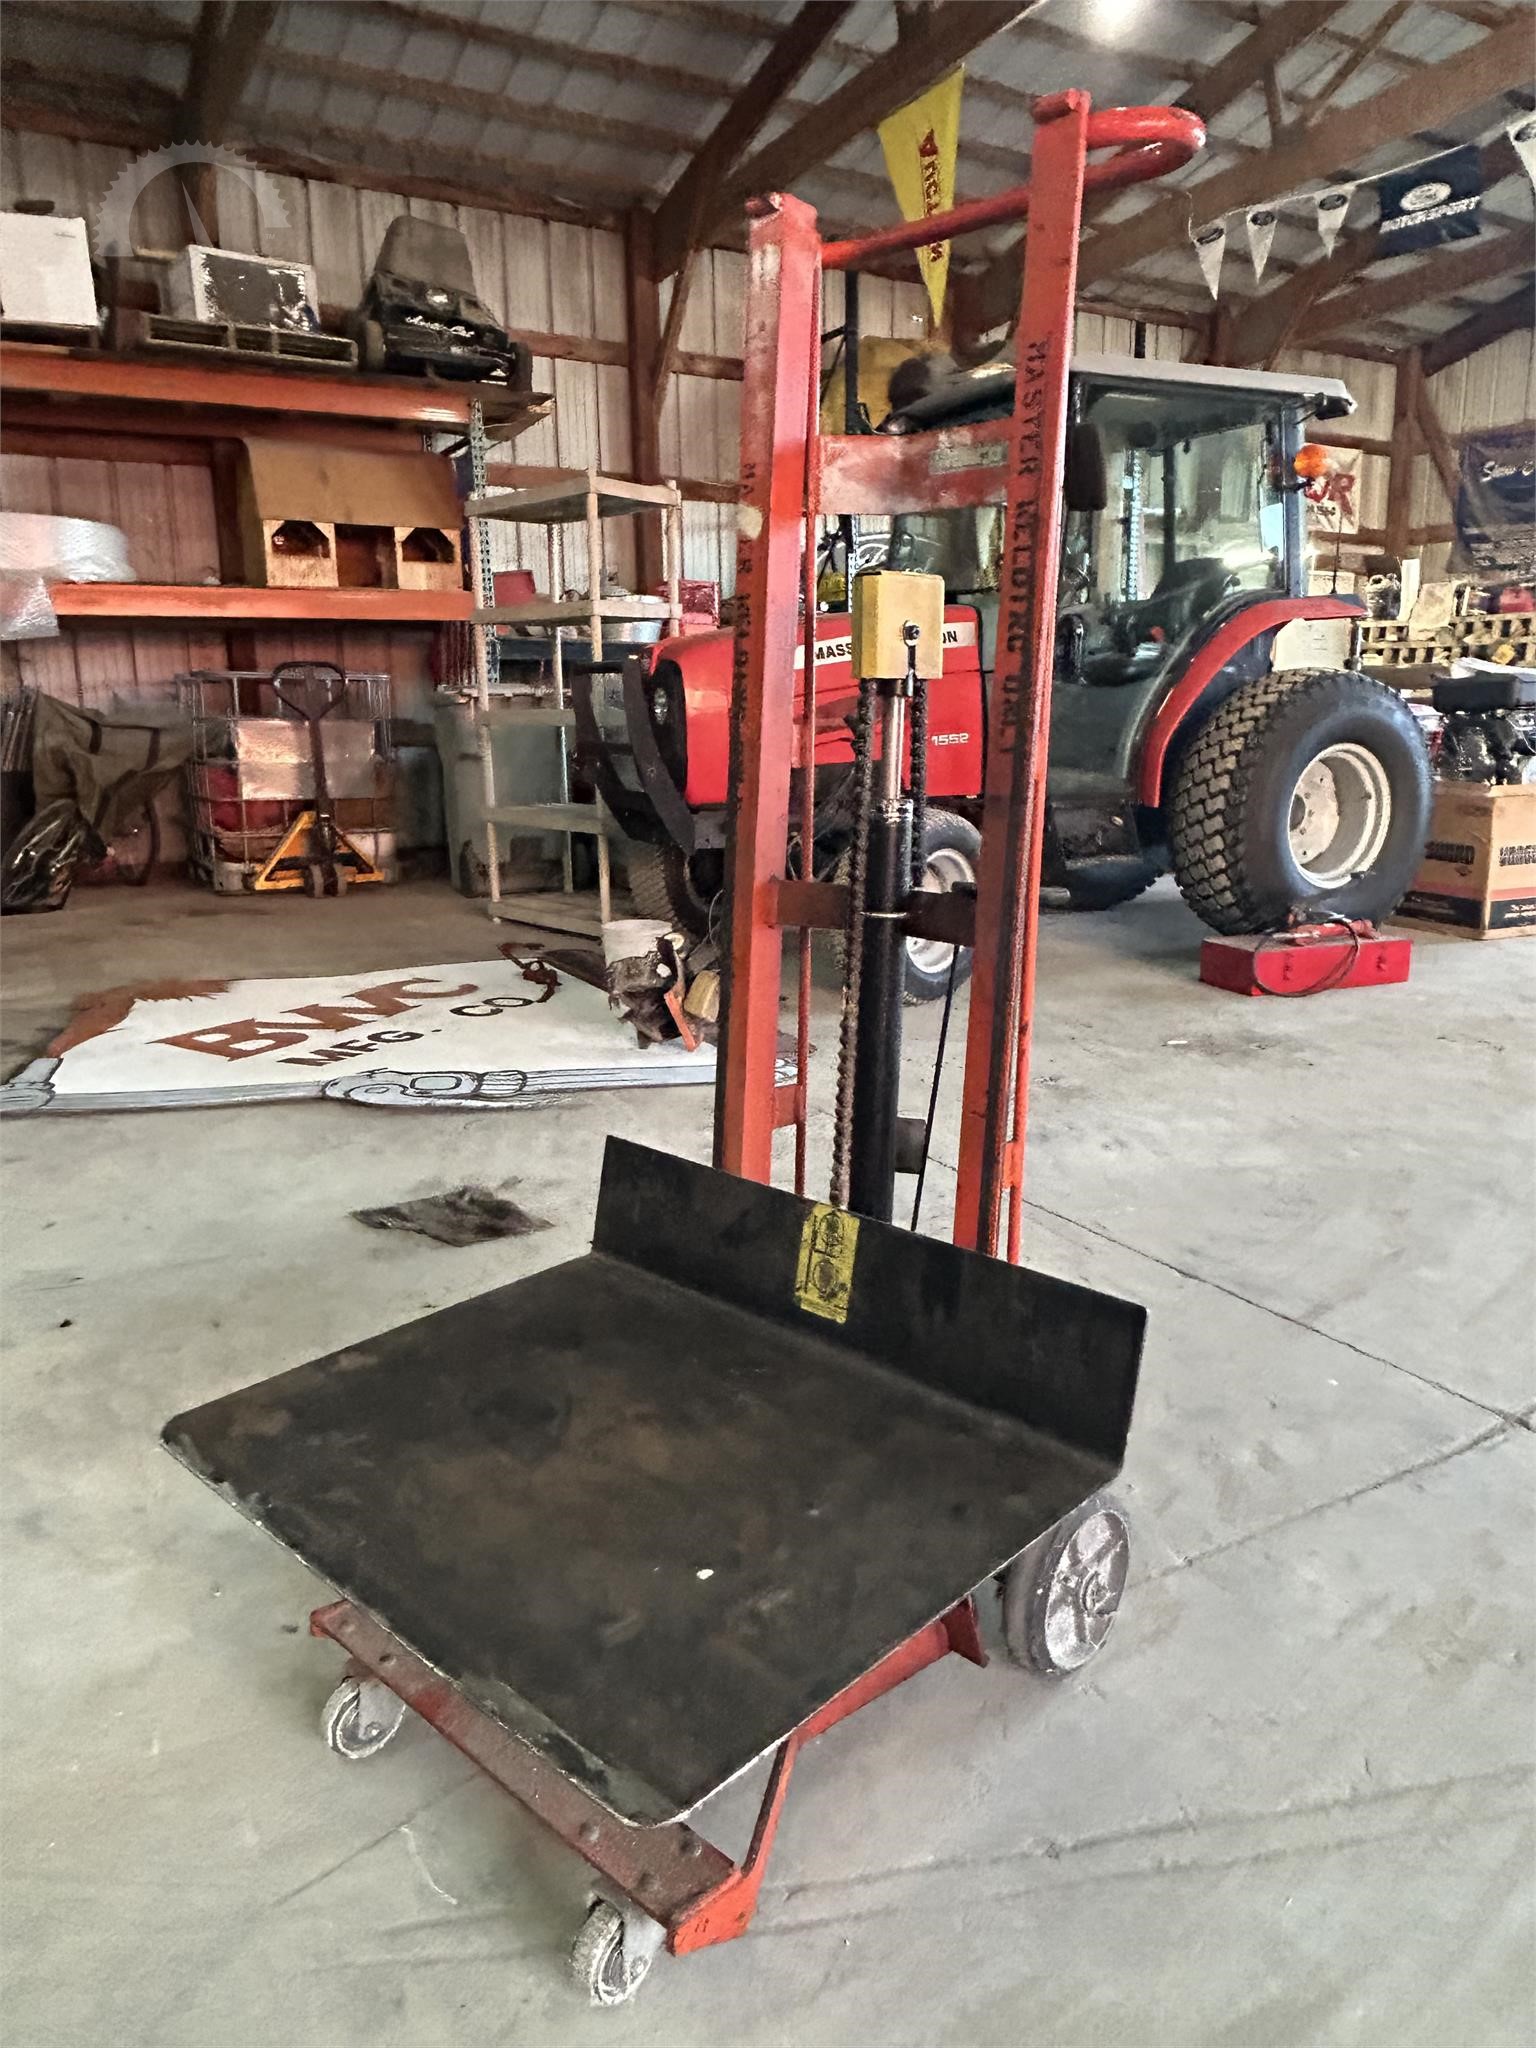 REELCRAFT Shop / Warehouse Auction Results in NORTH VERNON, INDIANA